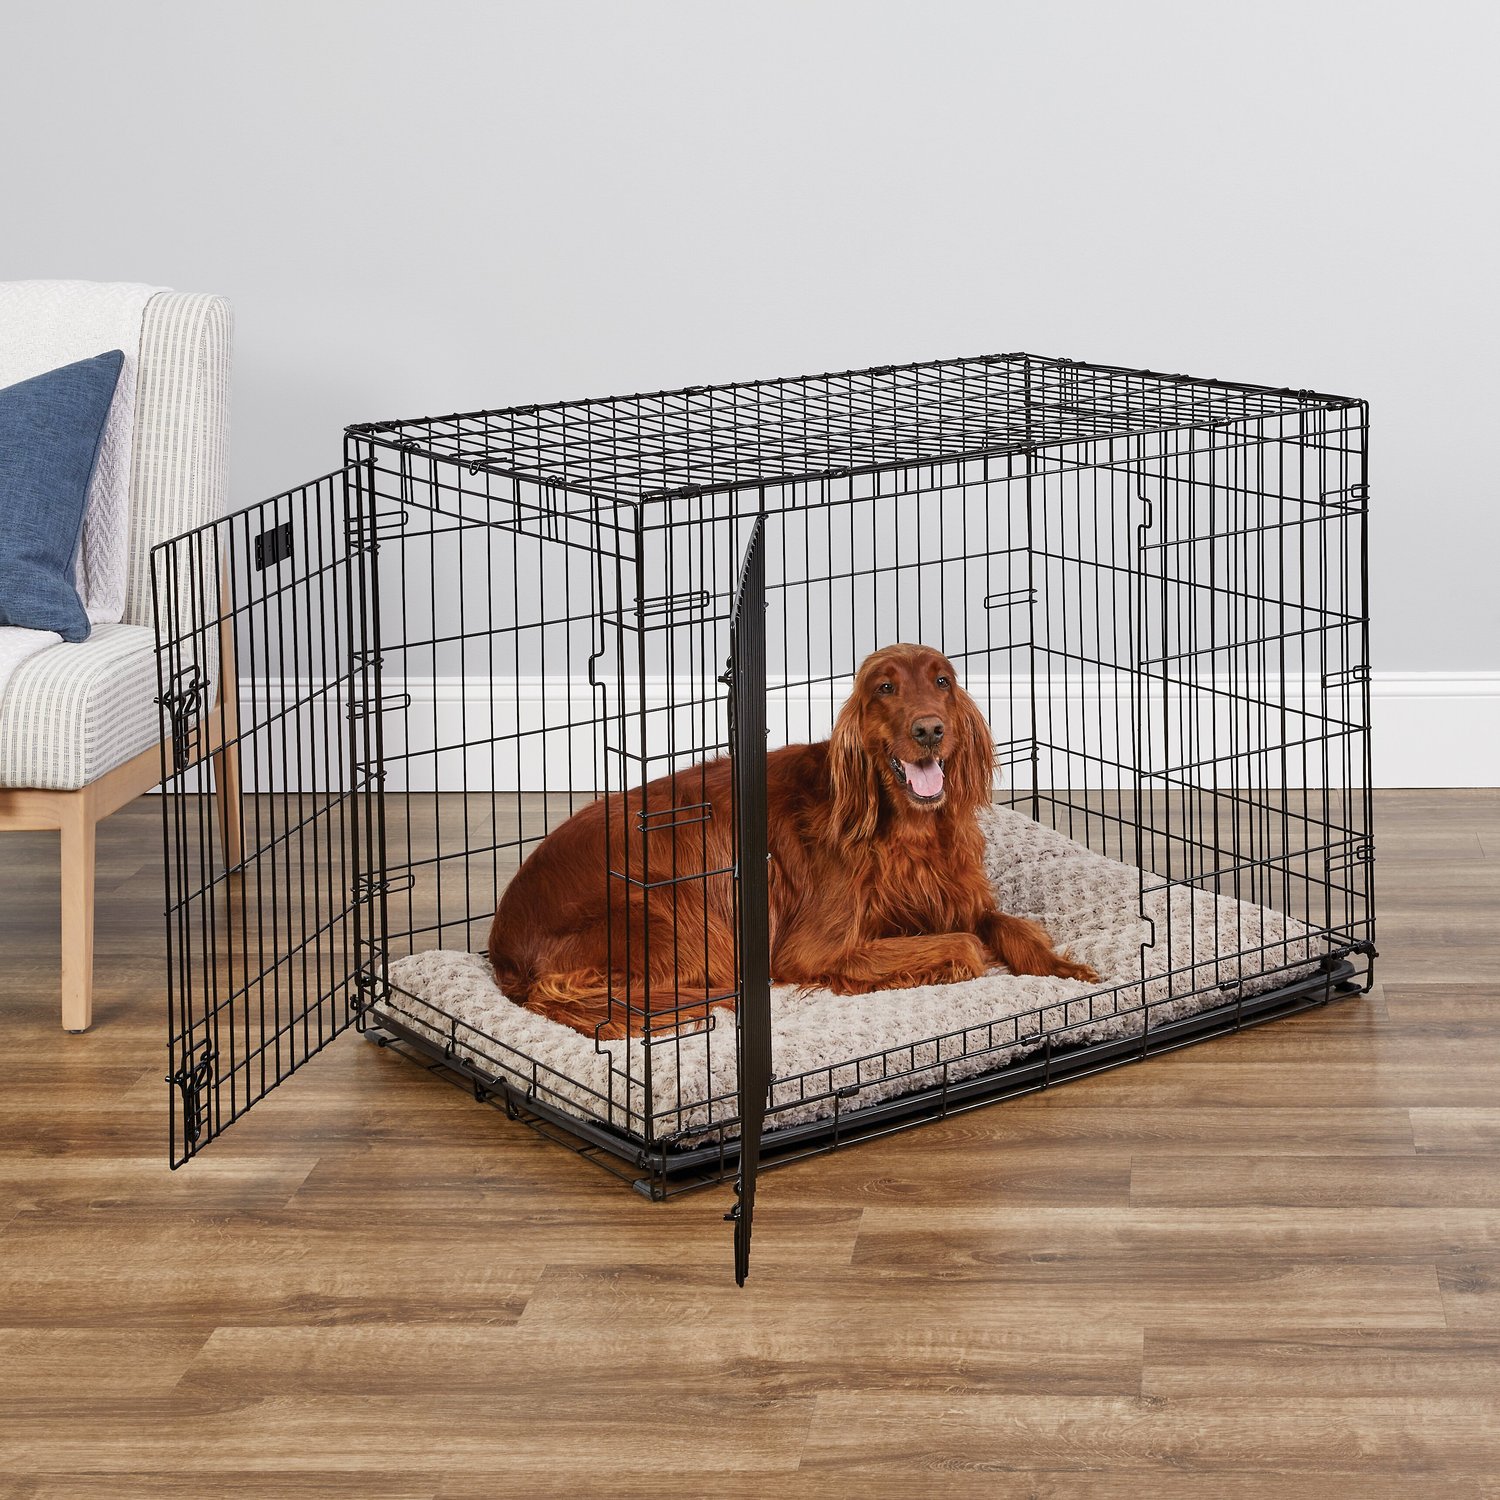 20 Pet Kennel Cat Rabbit Folding Steel Crate Animal Playpen Wire Metal Cage Black Folding Black Aoculus Dog Crate Small Dog Crate Arrival In 2-5 Days 